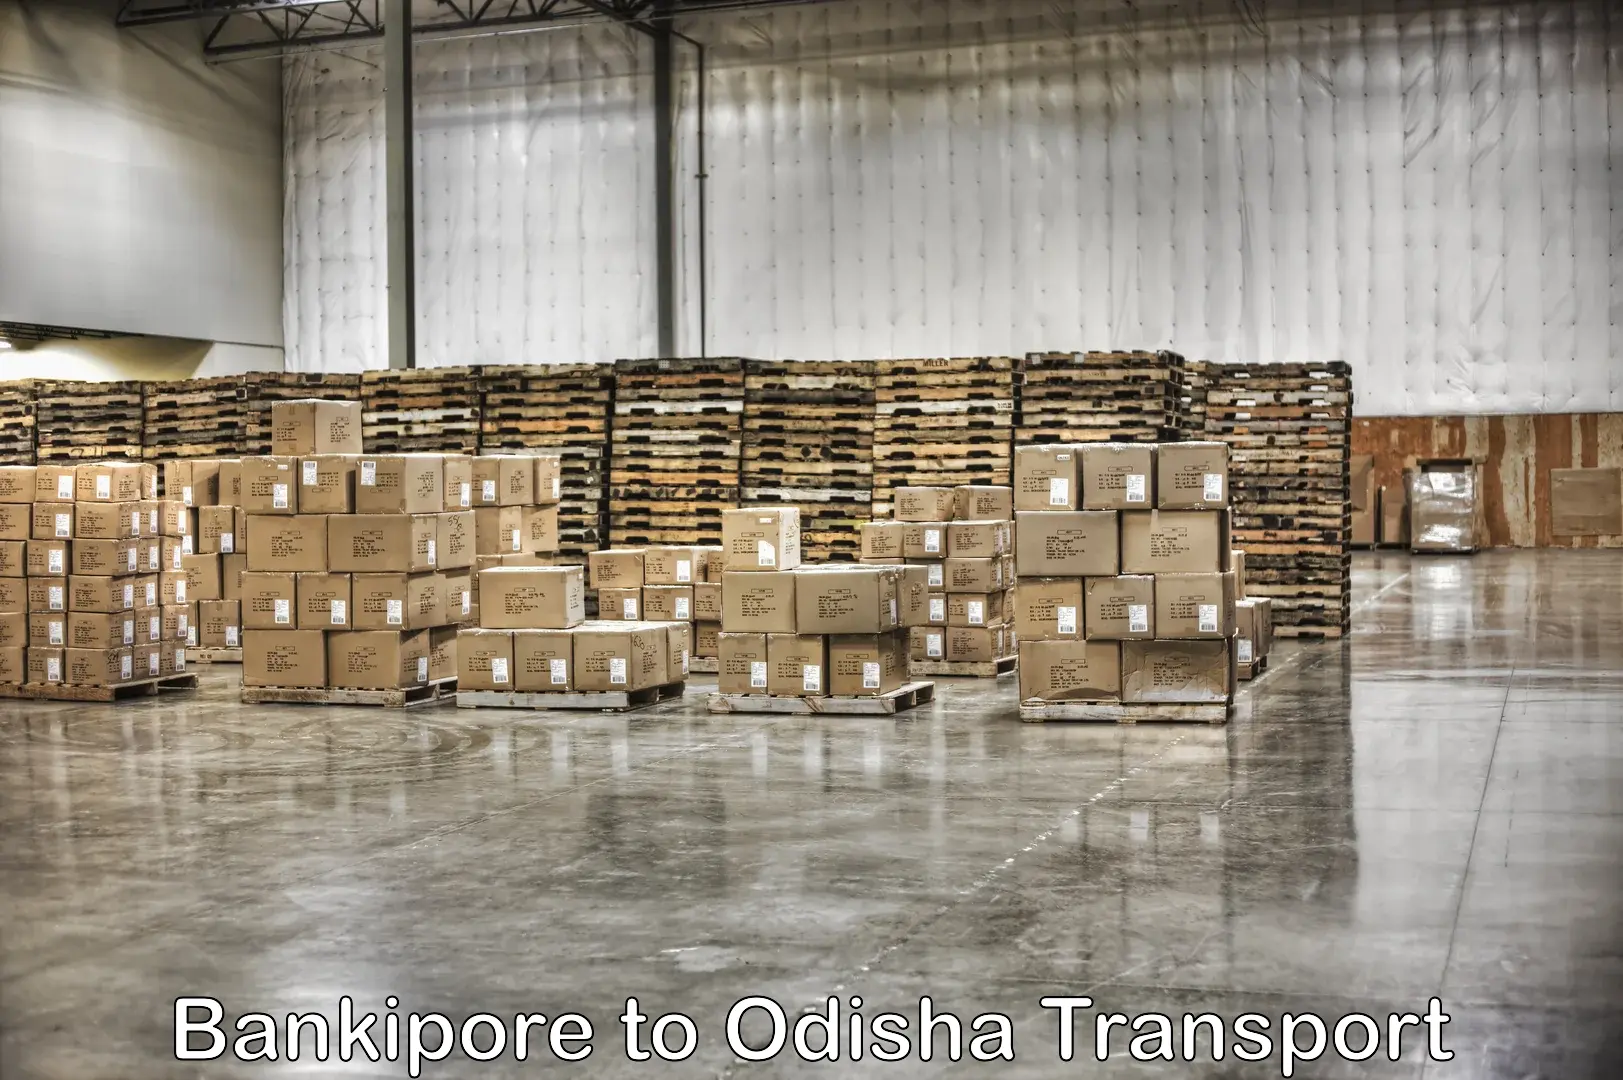 Truck transport companies in India Bankipore to Dhenkanal